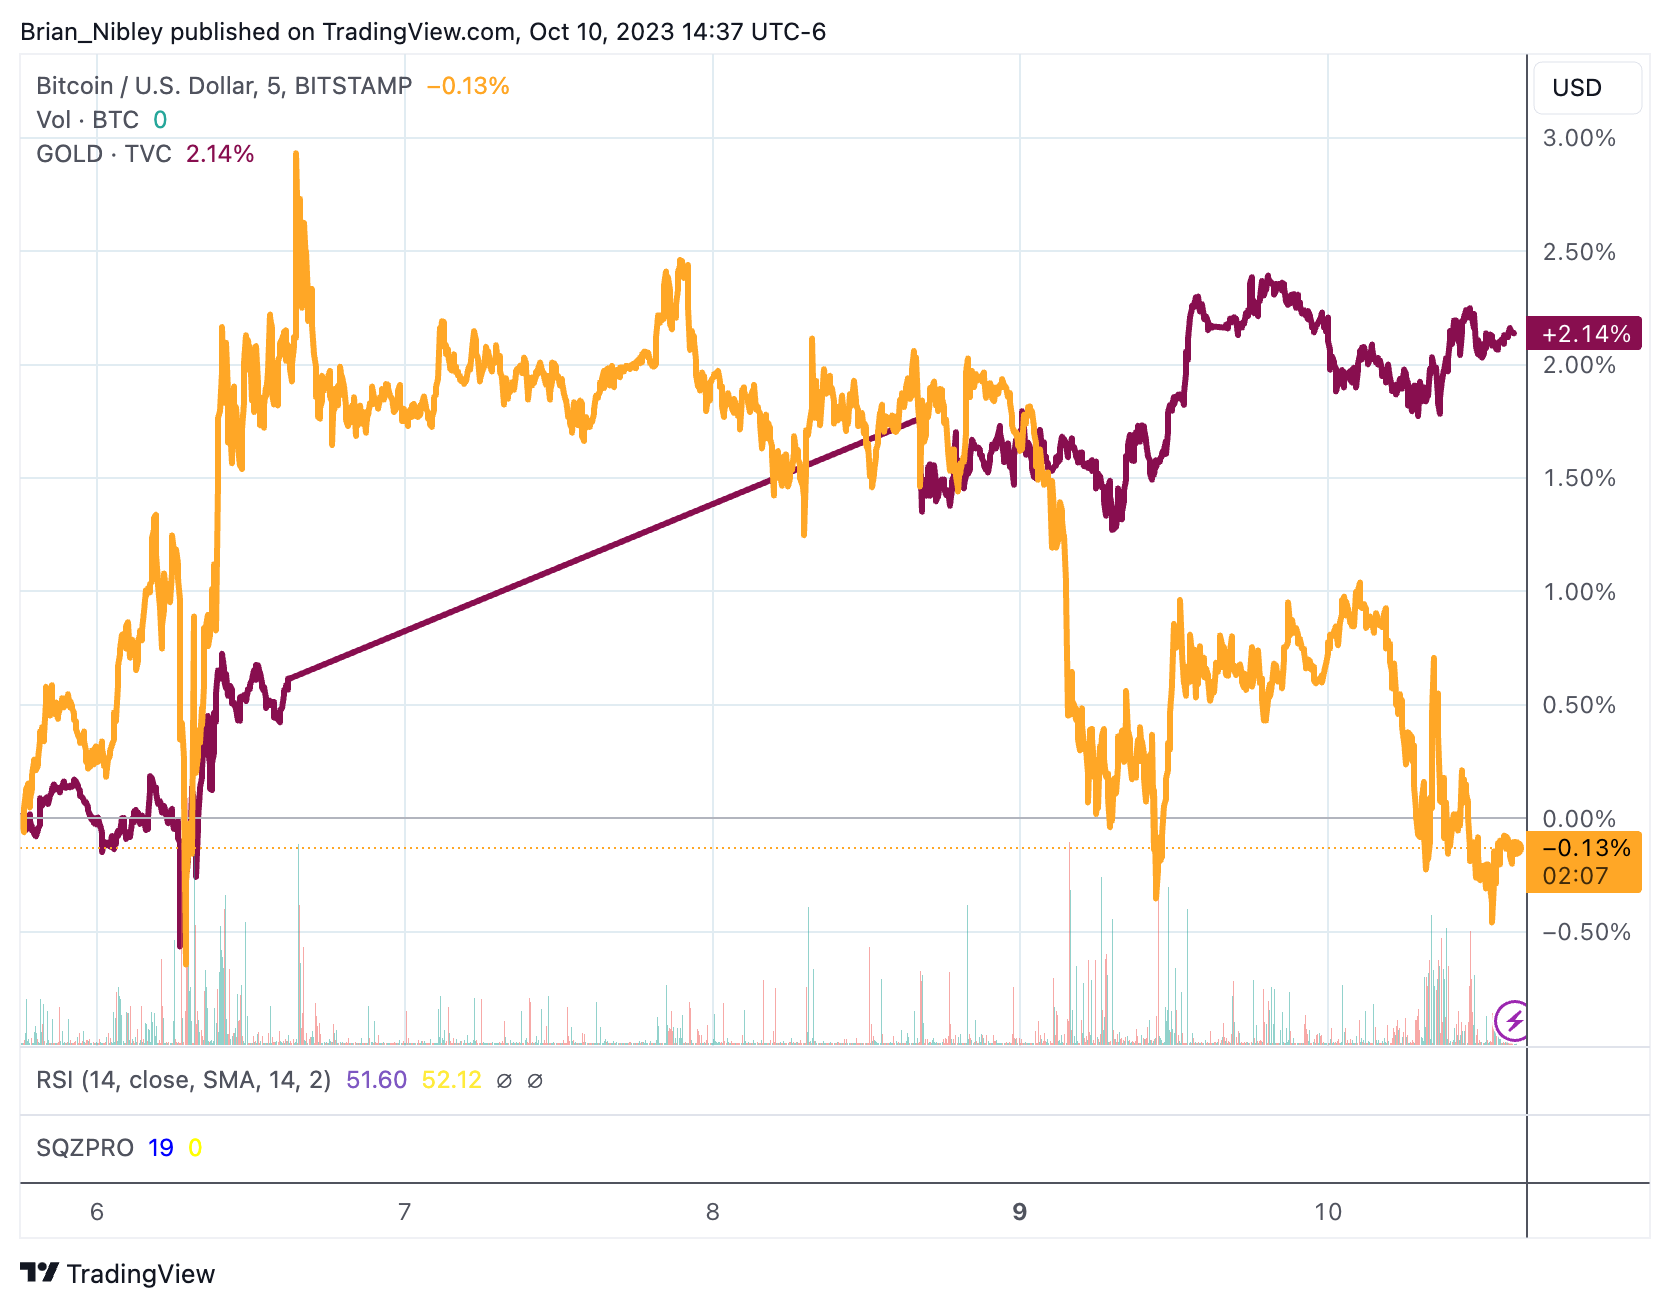 Gold and Bitcoin 5-day chart. Source: TradingView.